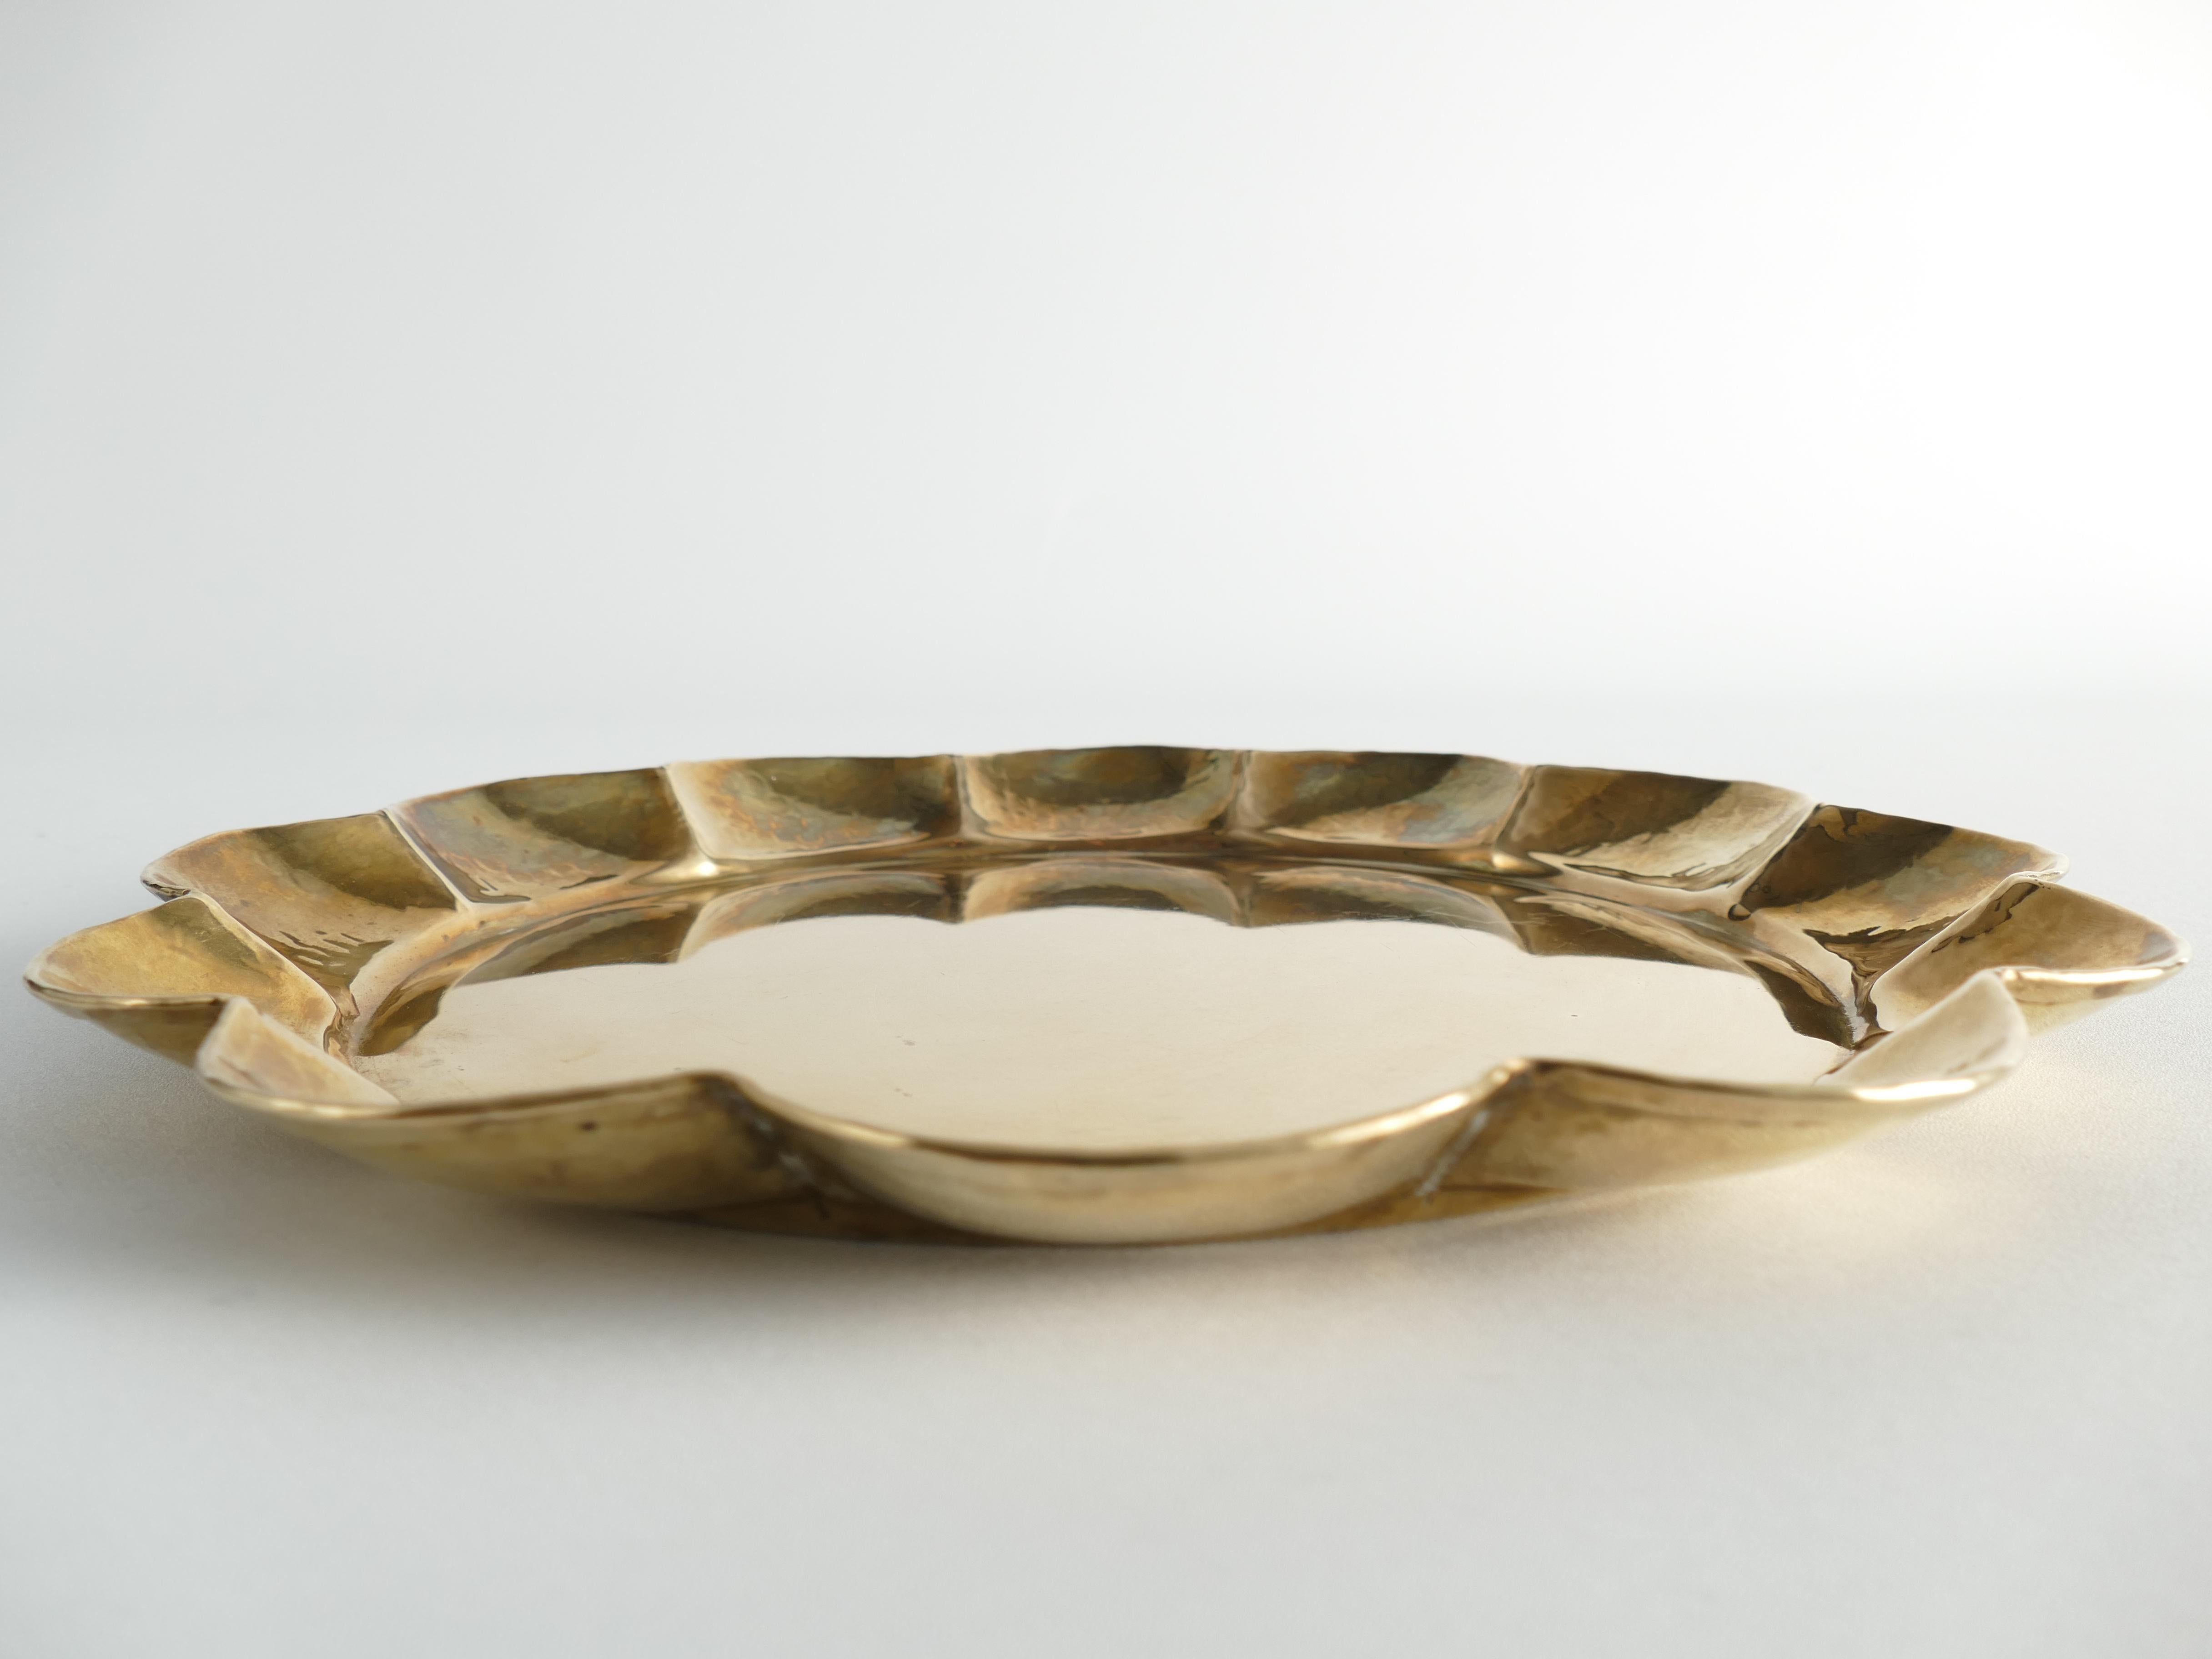 Hollywood Regency Round Brass Tray by Arvid Johansson, Arvika Konstsmide, Sweden For Sale 4